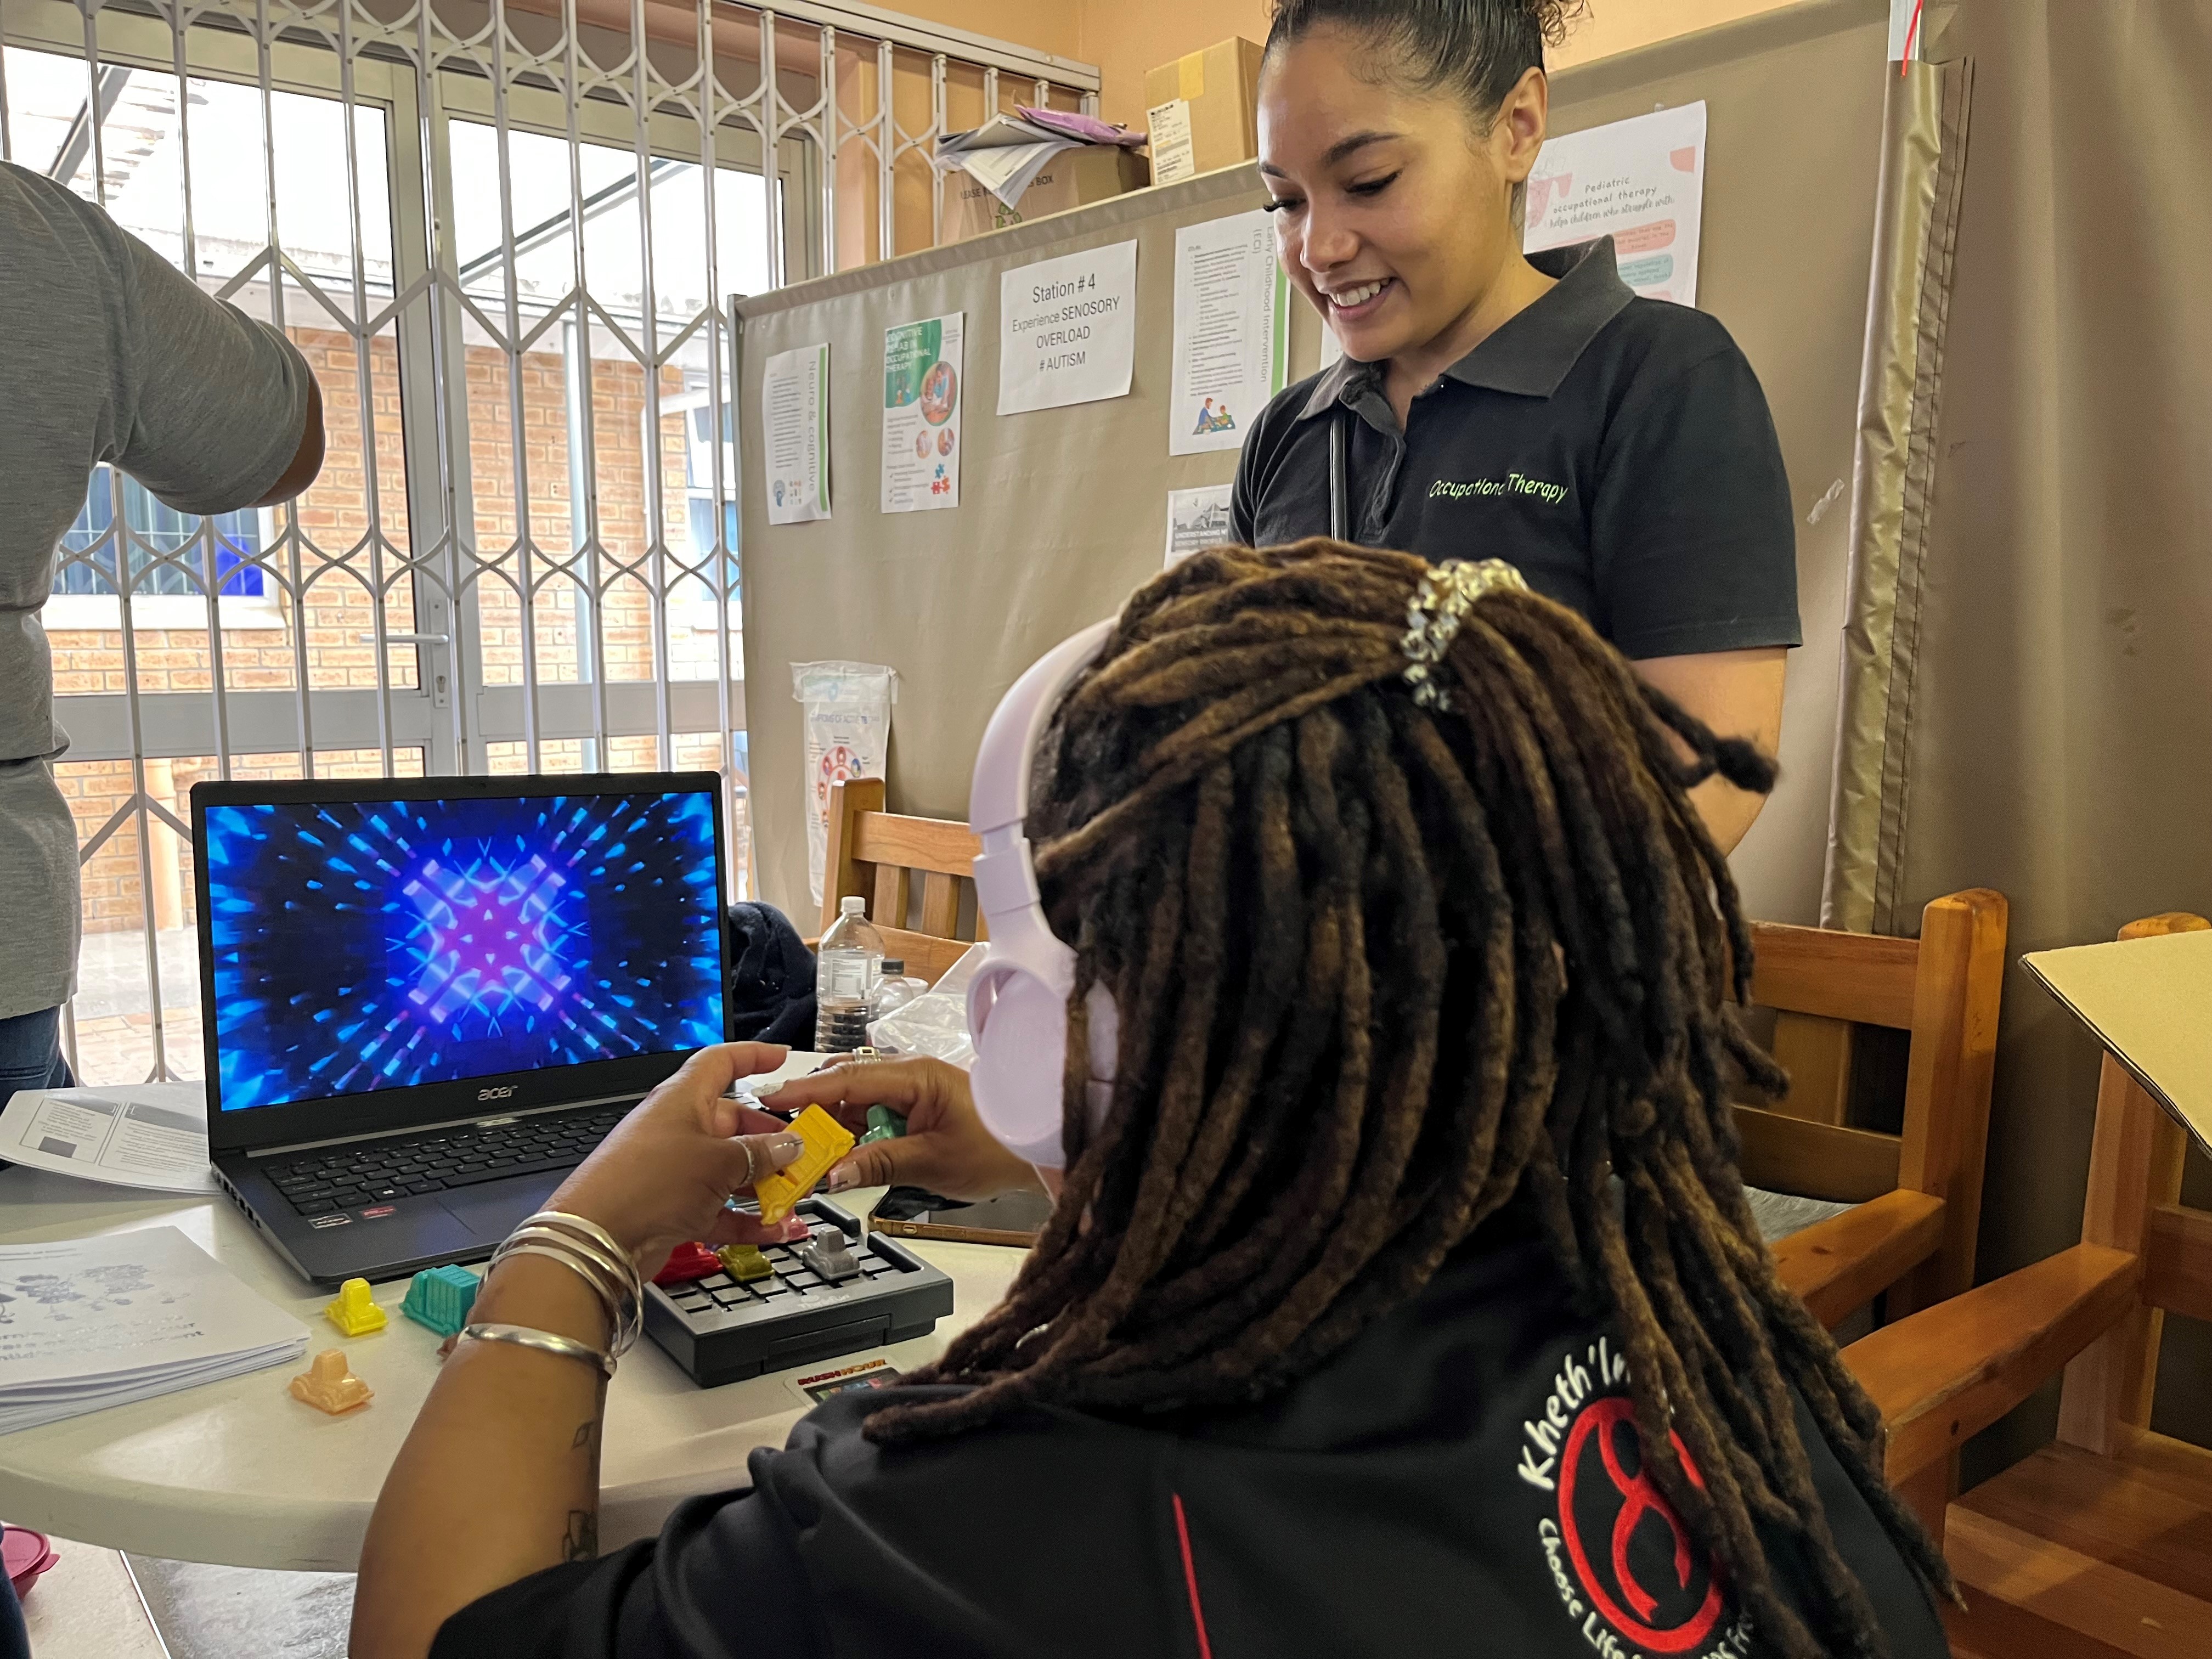 Bothasig CDC OT Shannen-Leigh Smith set up a sensory station to create awareness about the importance of occupational therapy for people living with autism.